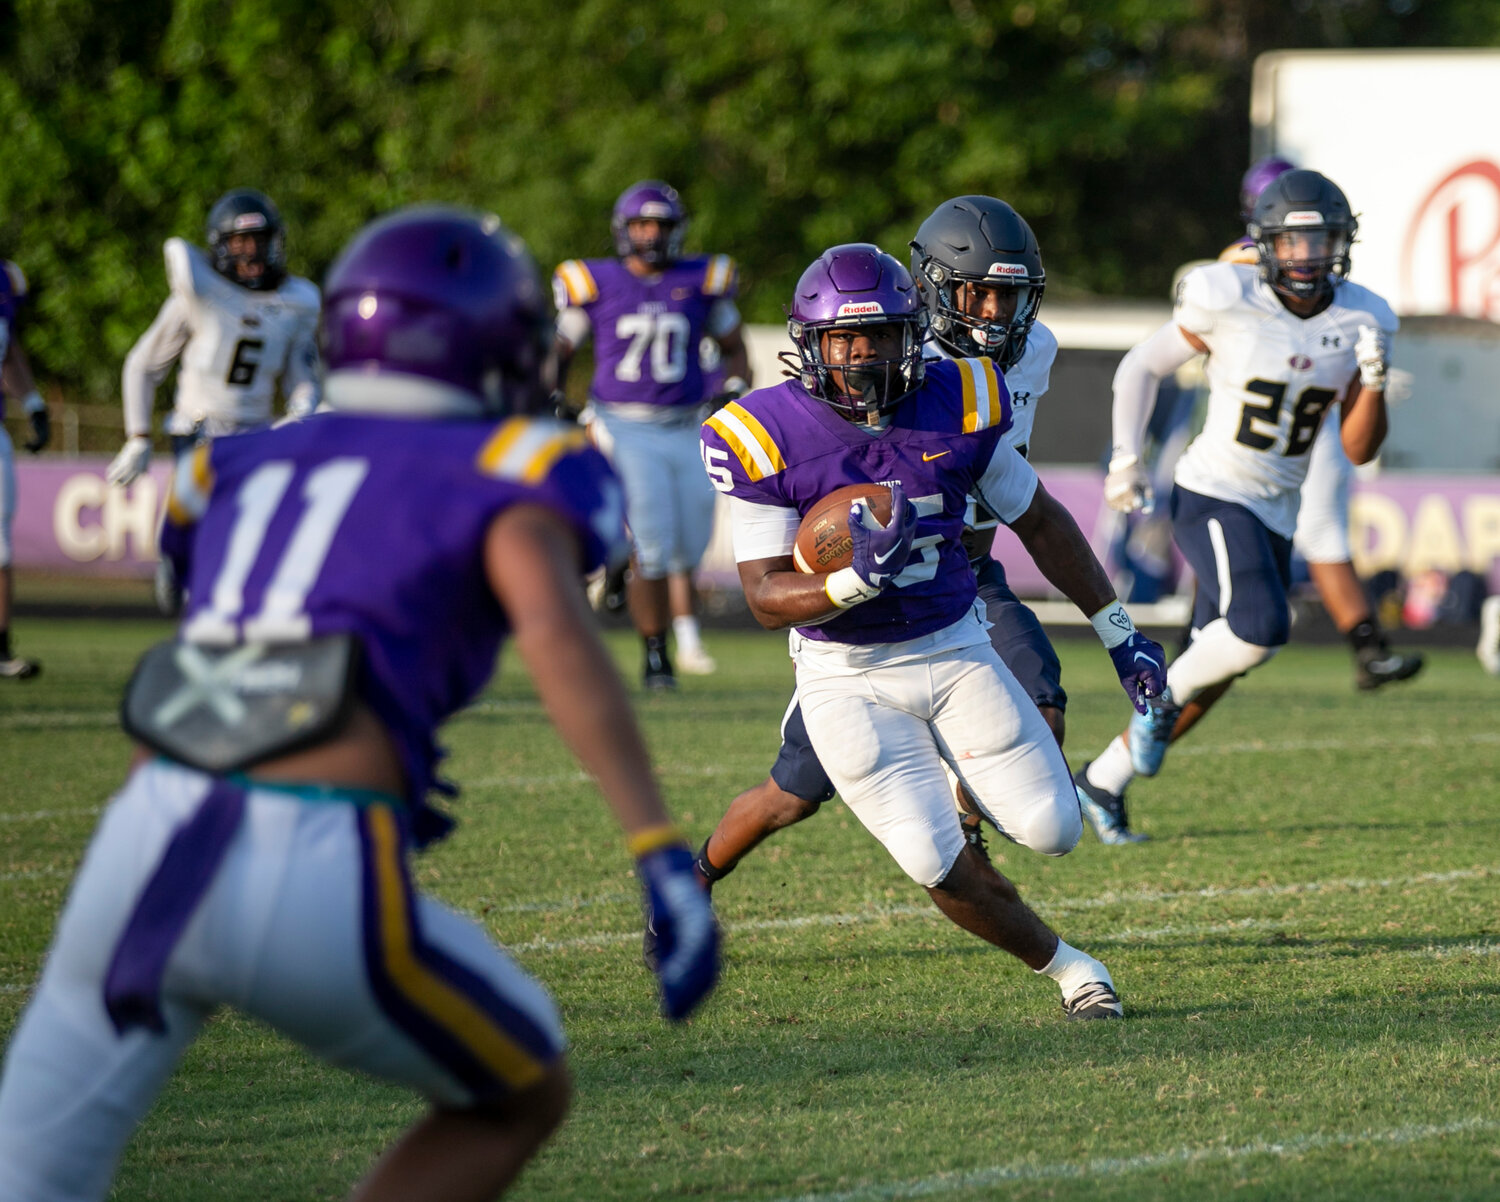 Daphne senior Nick Clark makes a cut to the outside on a first-down run during the Trojans’ spring game against the Foley Lions on May 19 at home. Clark paced the Daphne offense in Week 1 of the regular season with two touchdowns and 114 rushing yards on 21 carries to help the Trojans take down Murphy 19-0.